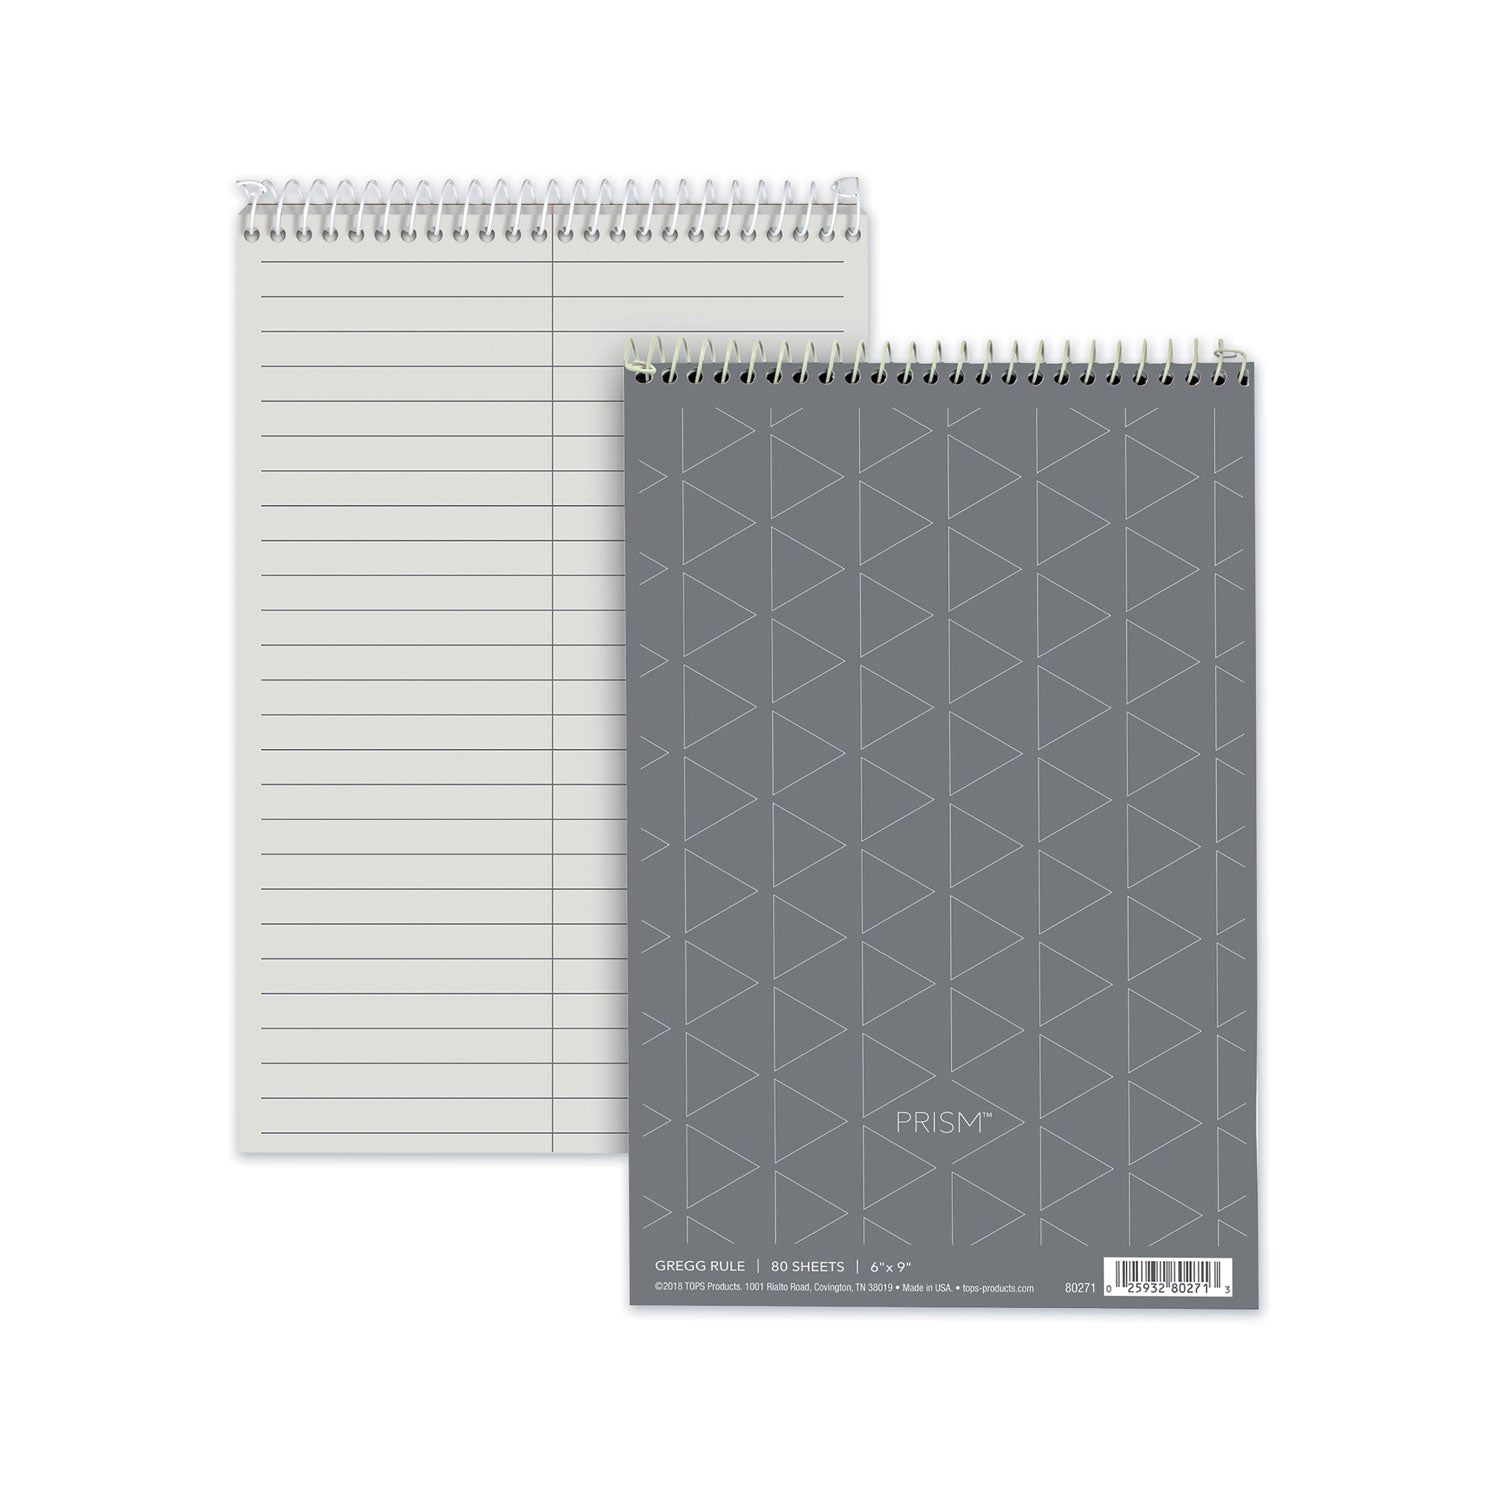 Prism Steno Pads, Gregg Rule, Gray Cover, 80 Gray 6 x 9 Sheets, 4/Pack - 